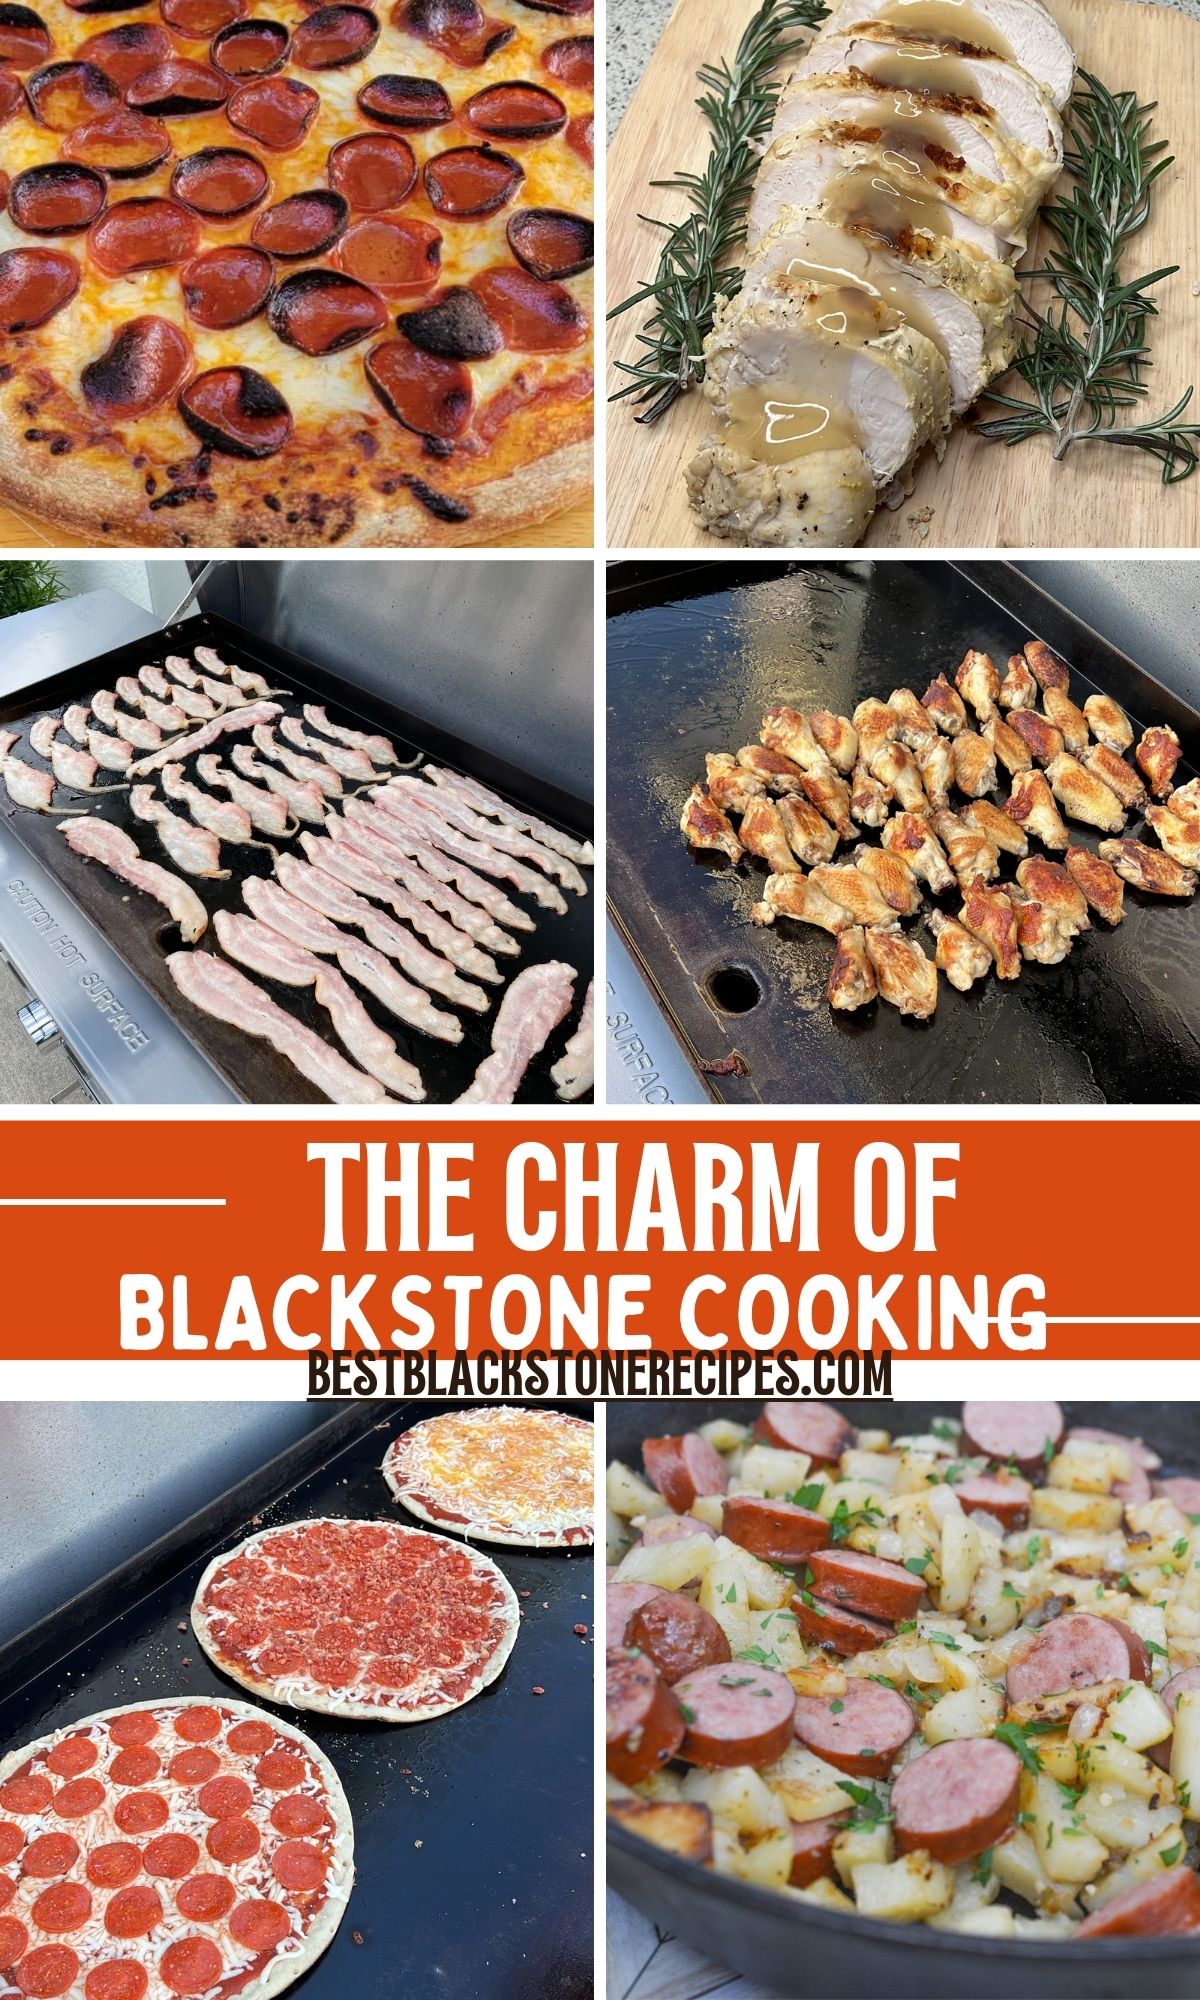 The charm of blackstone cooking.